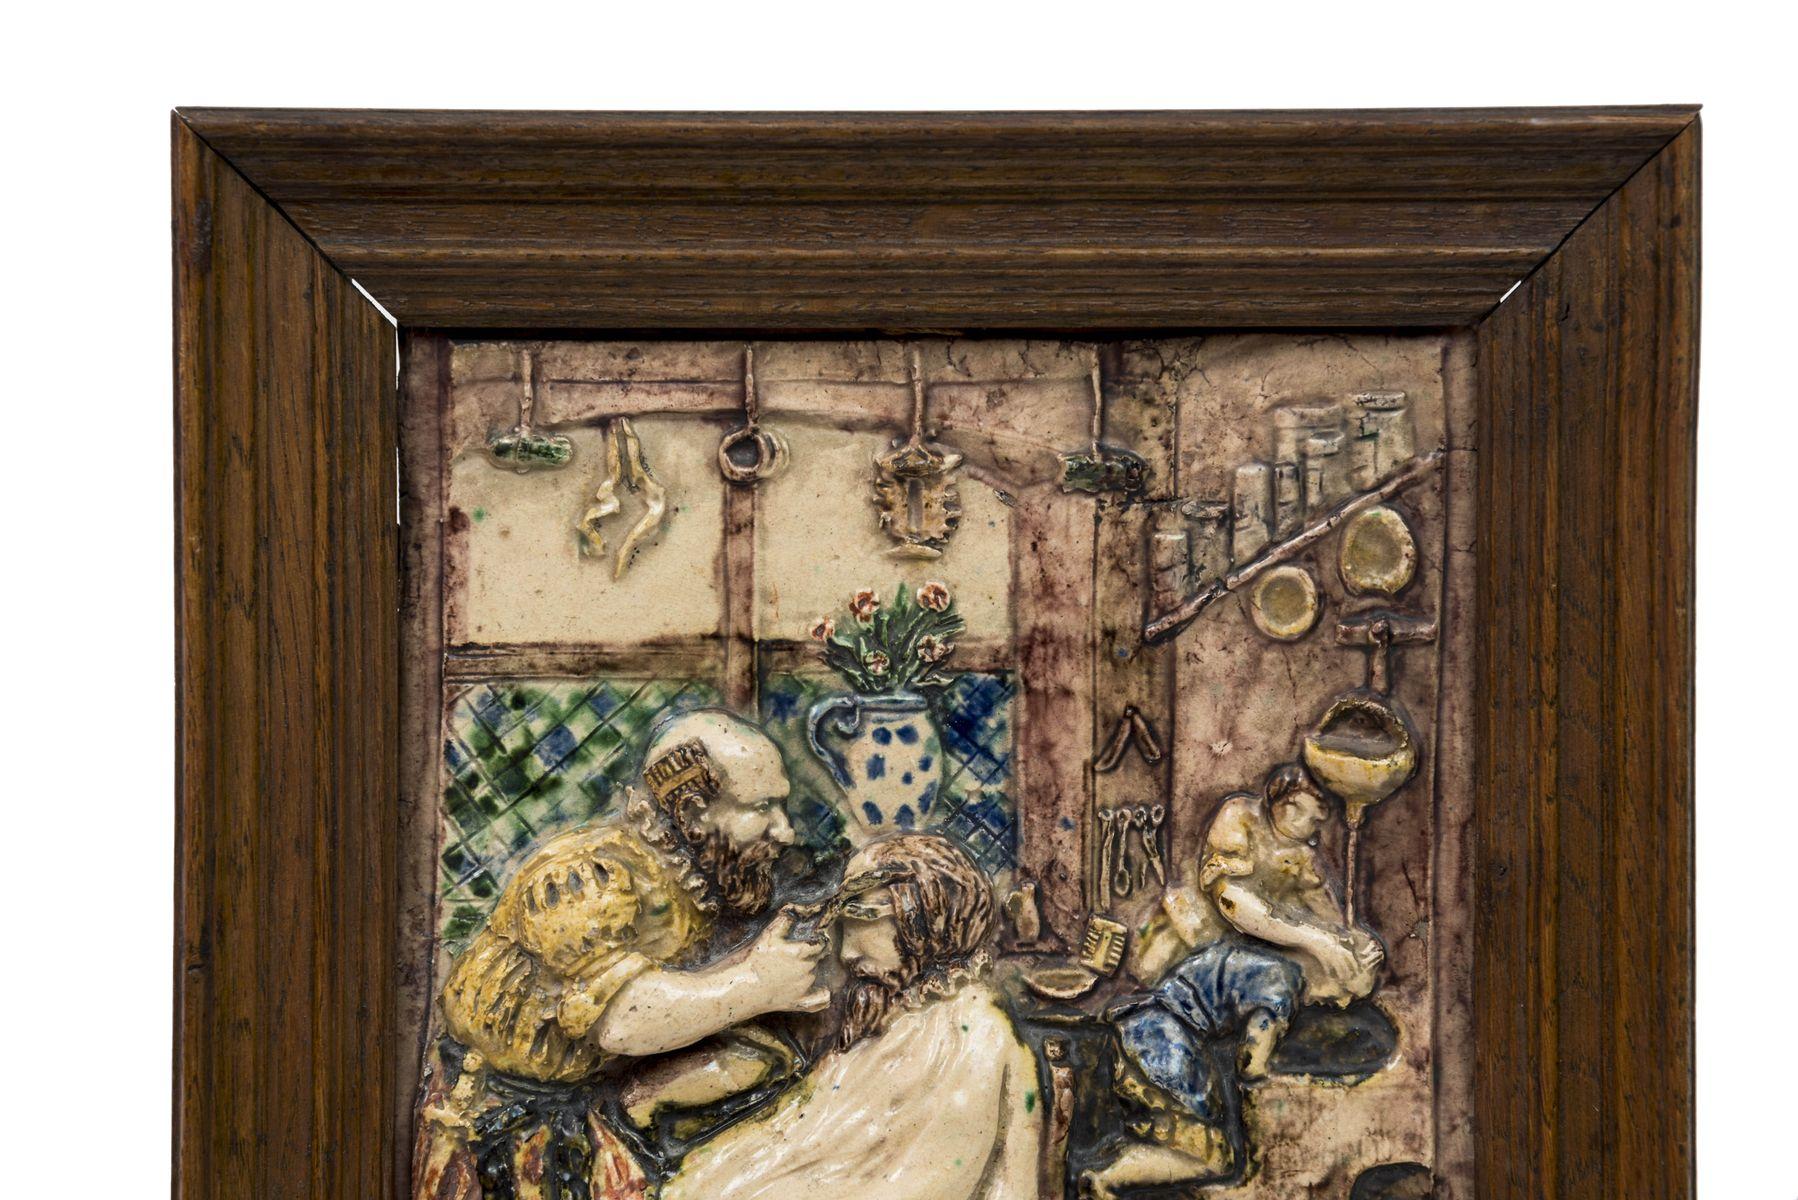 This ceramic plaque was made at the end of the 19th century by the Landais workshop. It depicts the interior of a barbershop while a customer is getting his hair done. in the background, we can see a barber washing the hair of another man. The scene